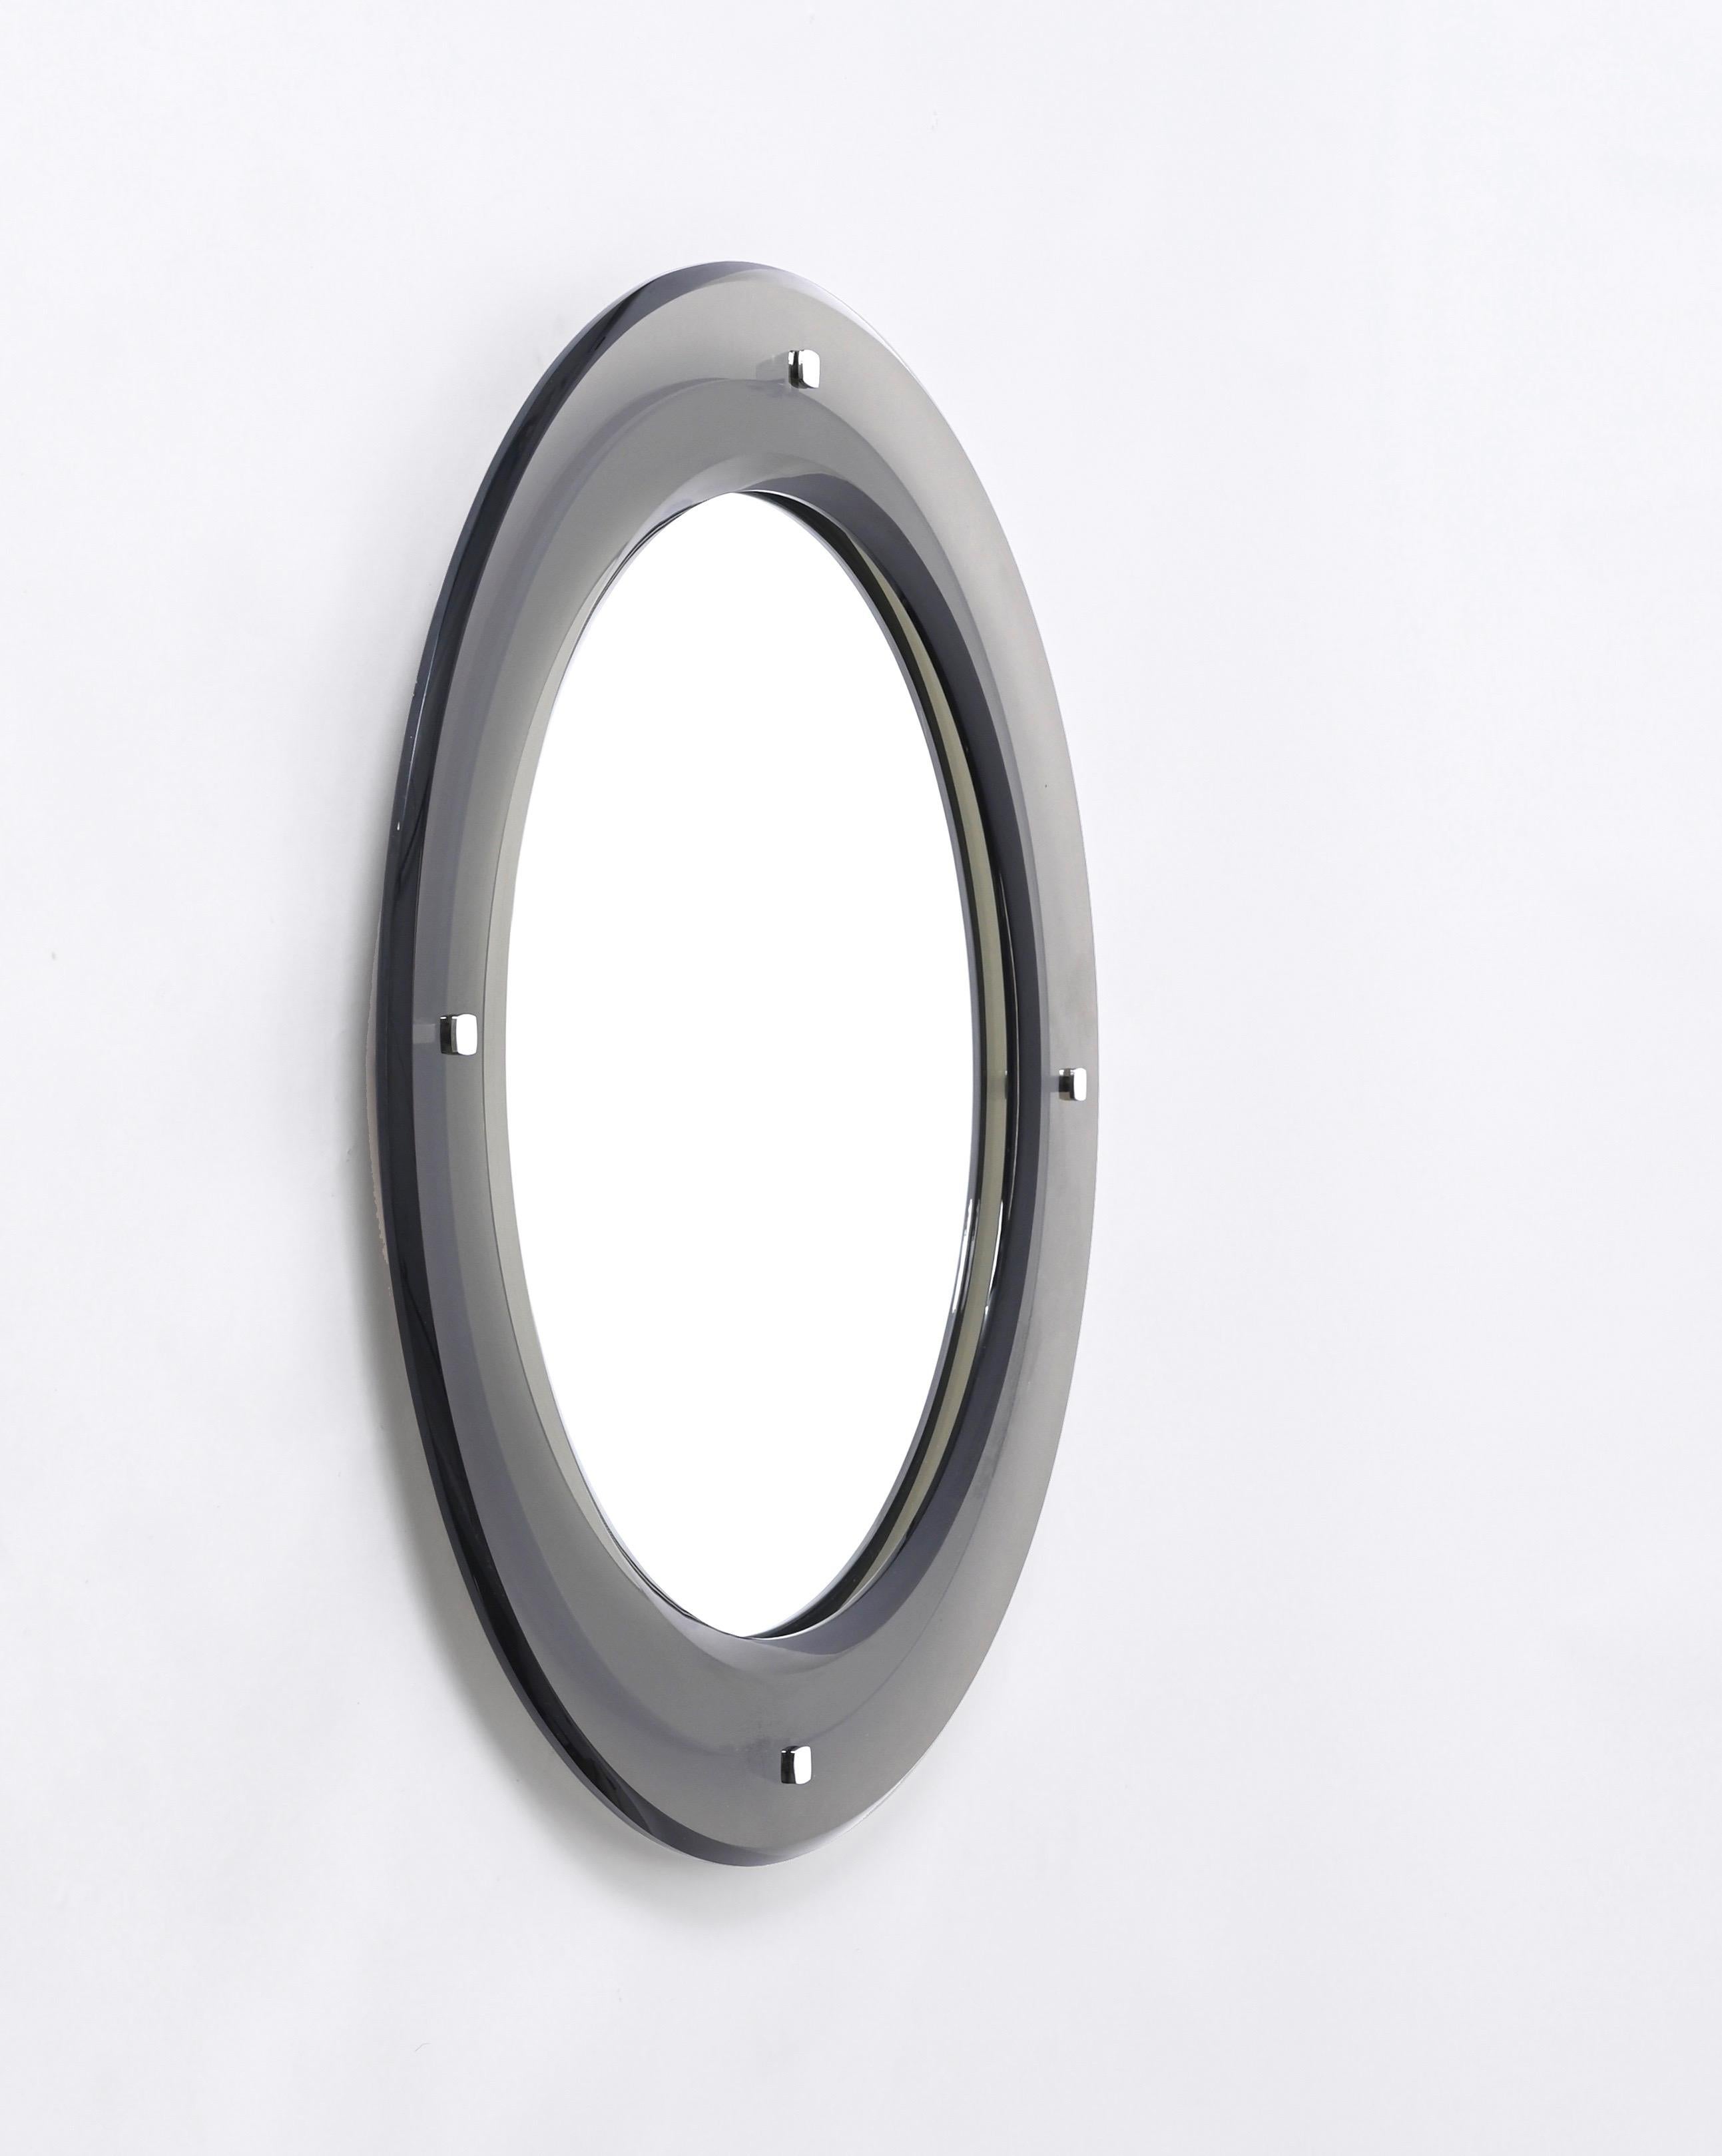 Midcentury Italian Round Mirror with Beveled Smoked Glass by Sena Cristal, 1970s For Sale 9